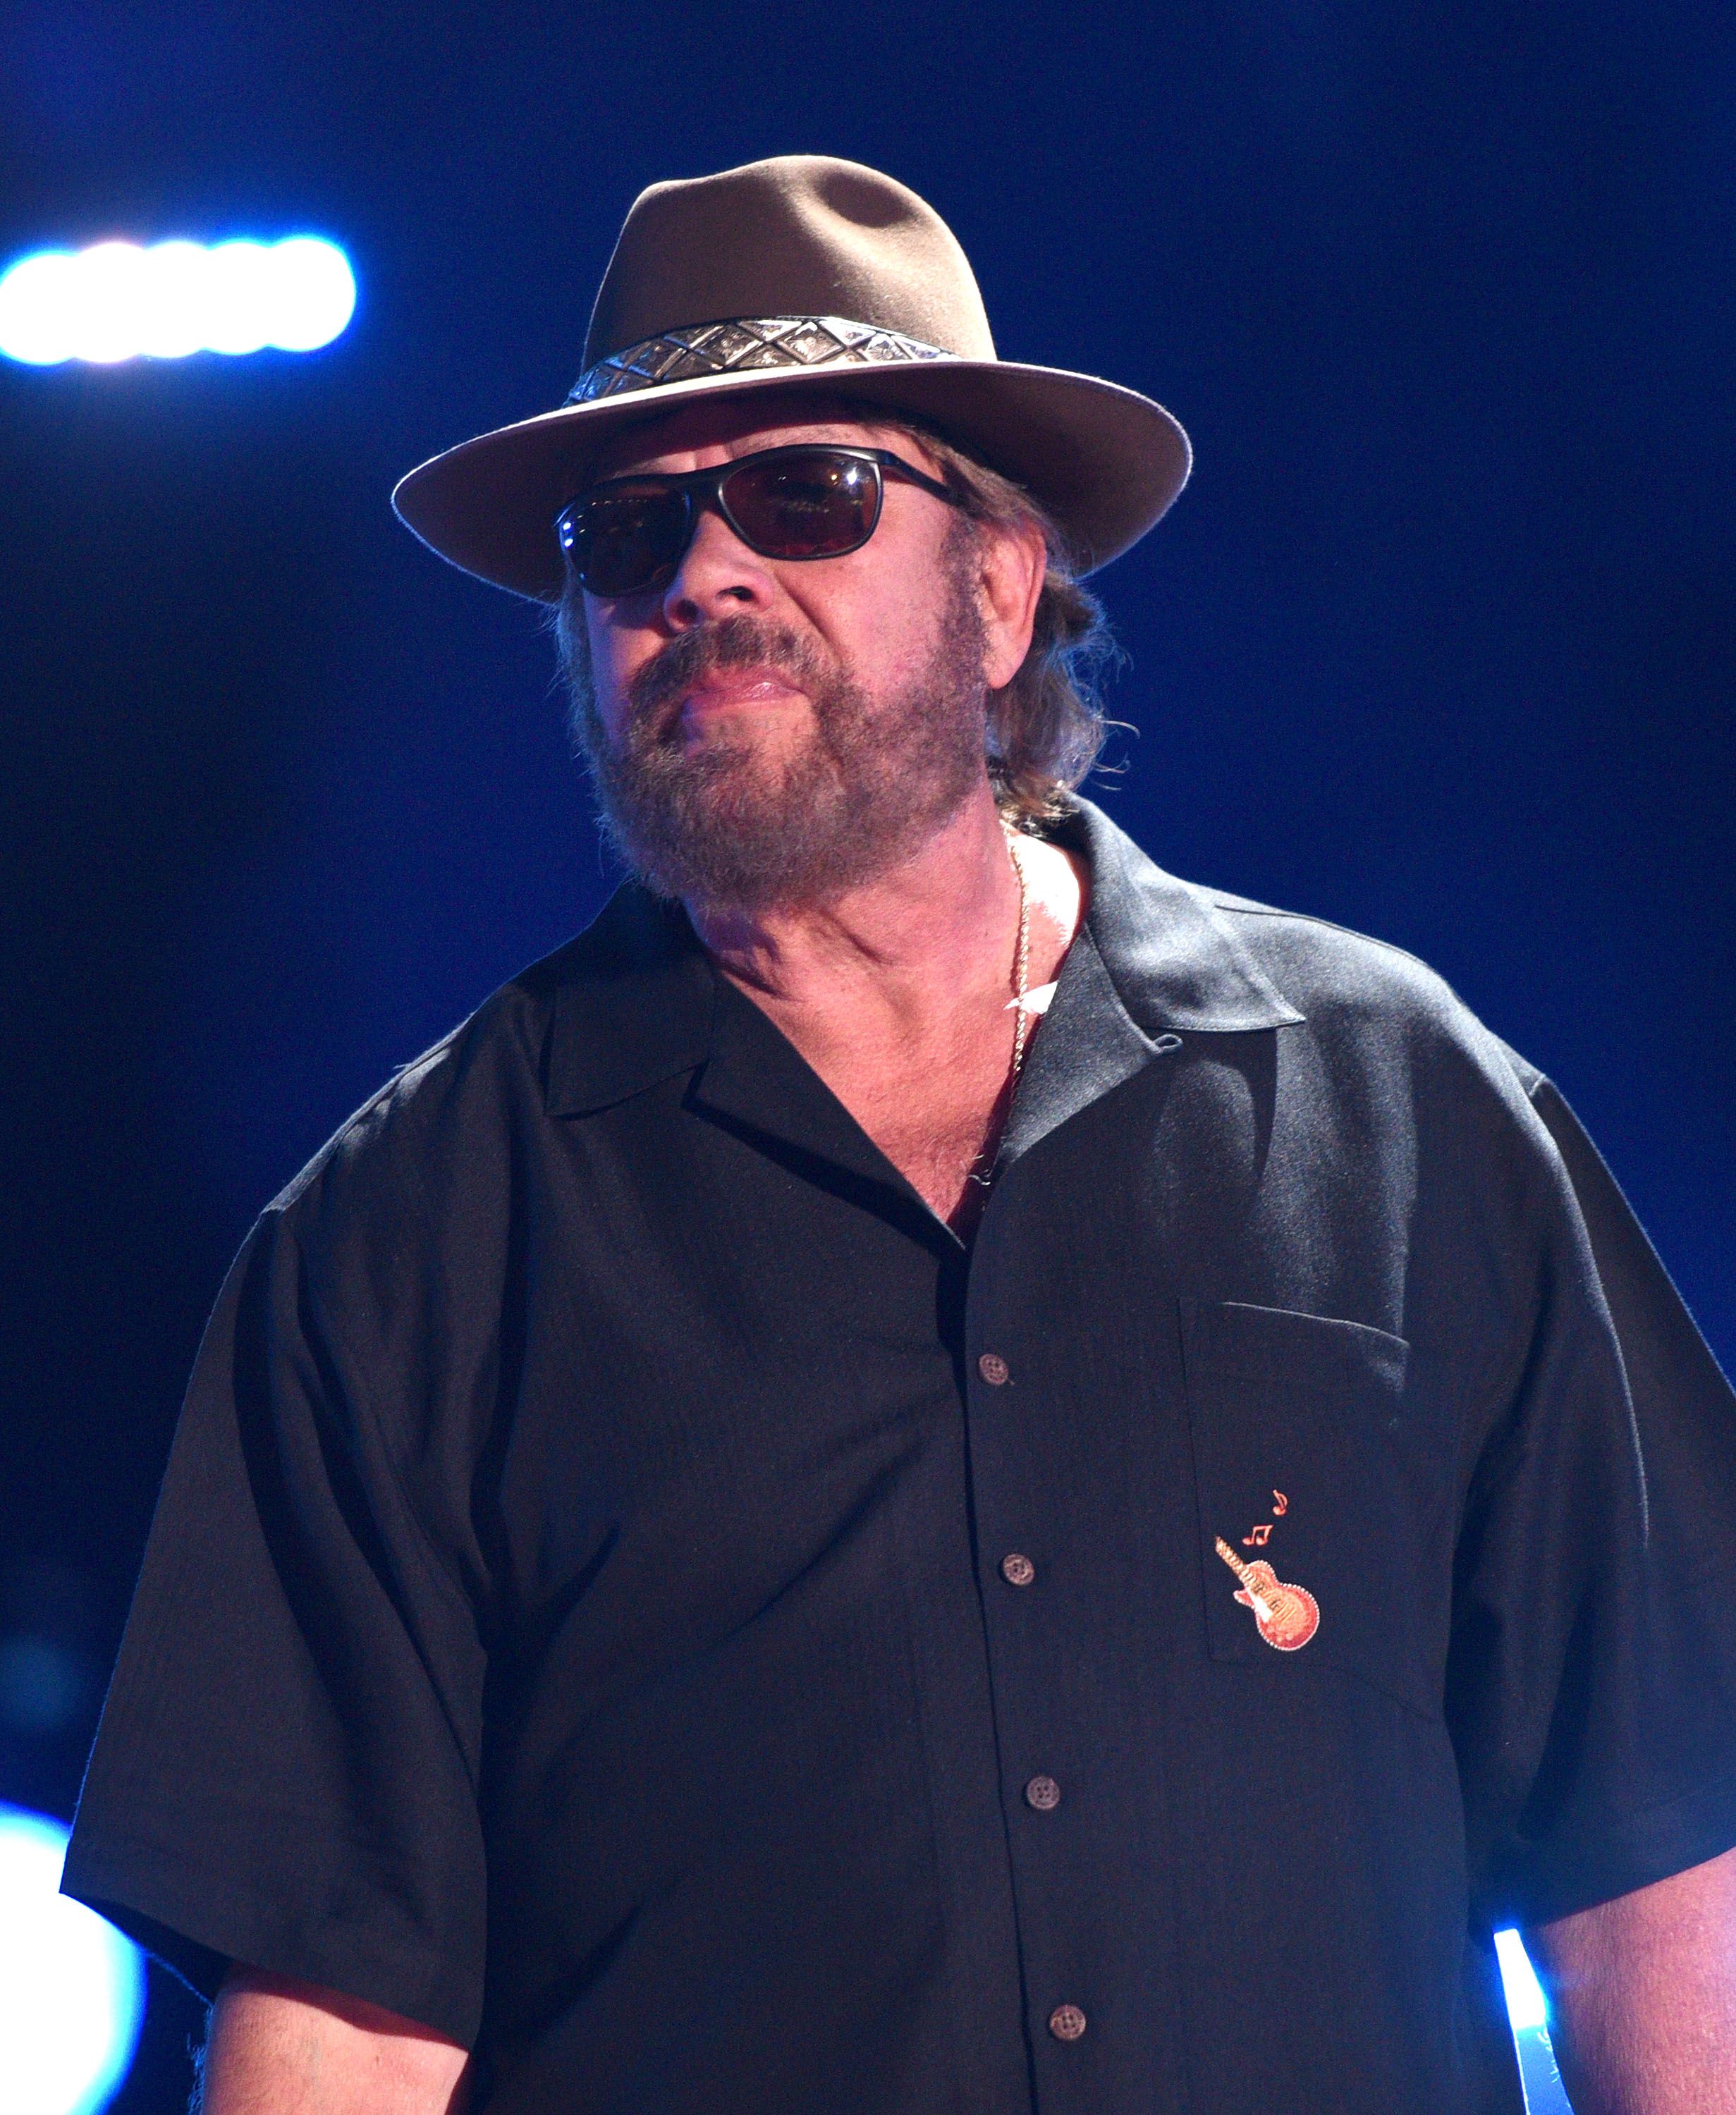 Hank Williams Jr. performs during the 2016 CMA Music Festival on June 10, 2016 in Nashville, Tennessee. | Source: Getty Images